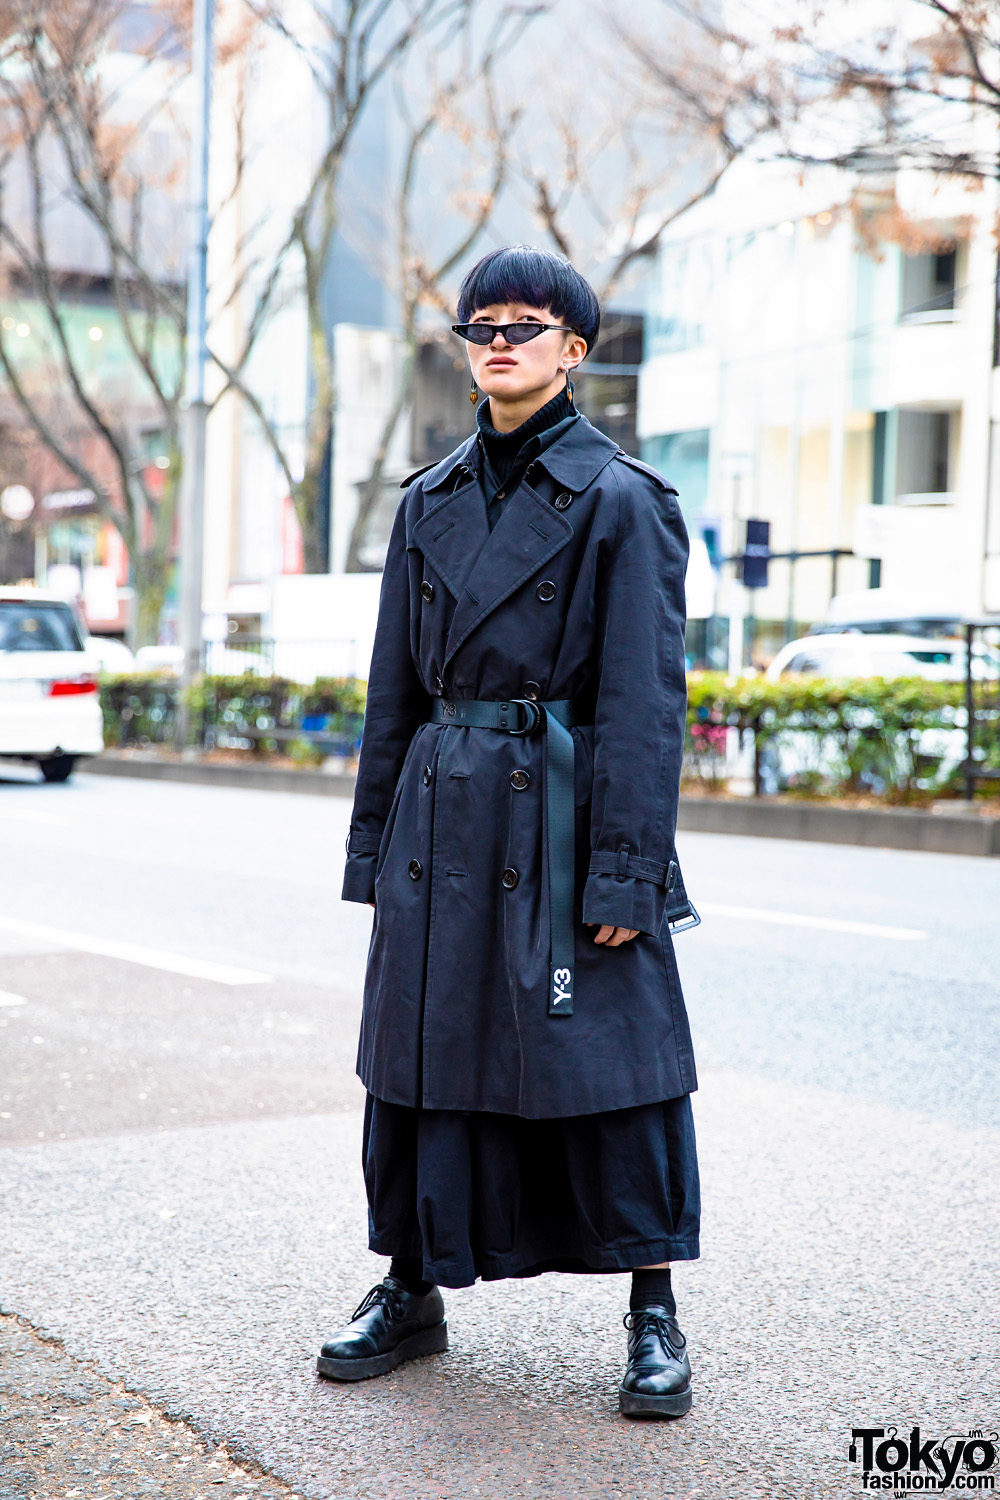 All Black Men's Winter Street Style w/ Burberry Trench Coat, Y-3, Notch Wide Pants, Whoop-De-Doo Shoes & SAAD Pointy Glasses